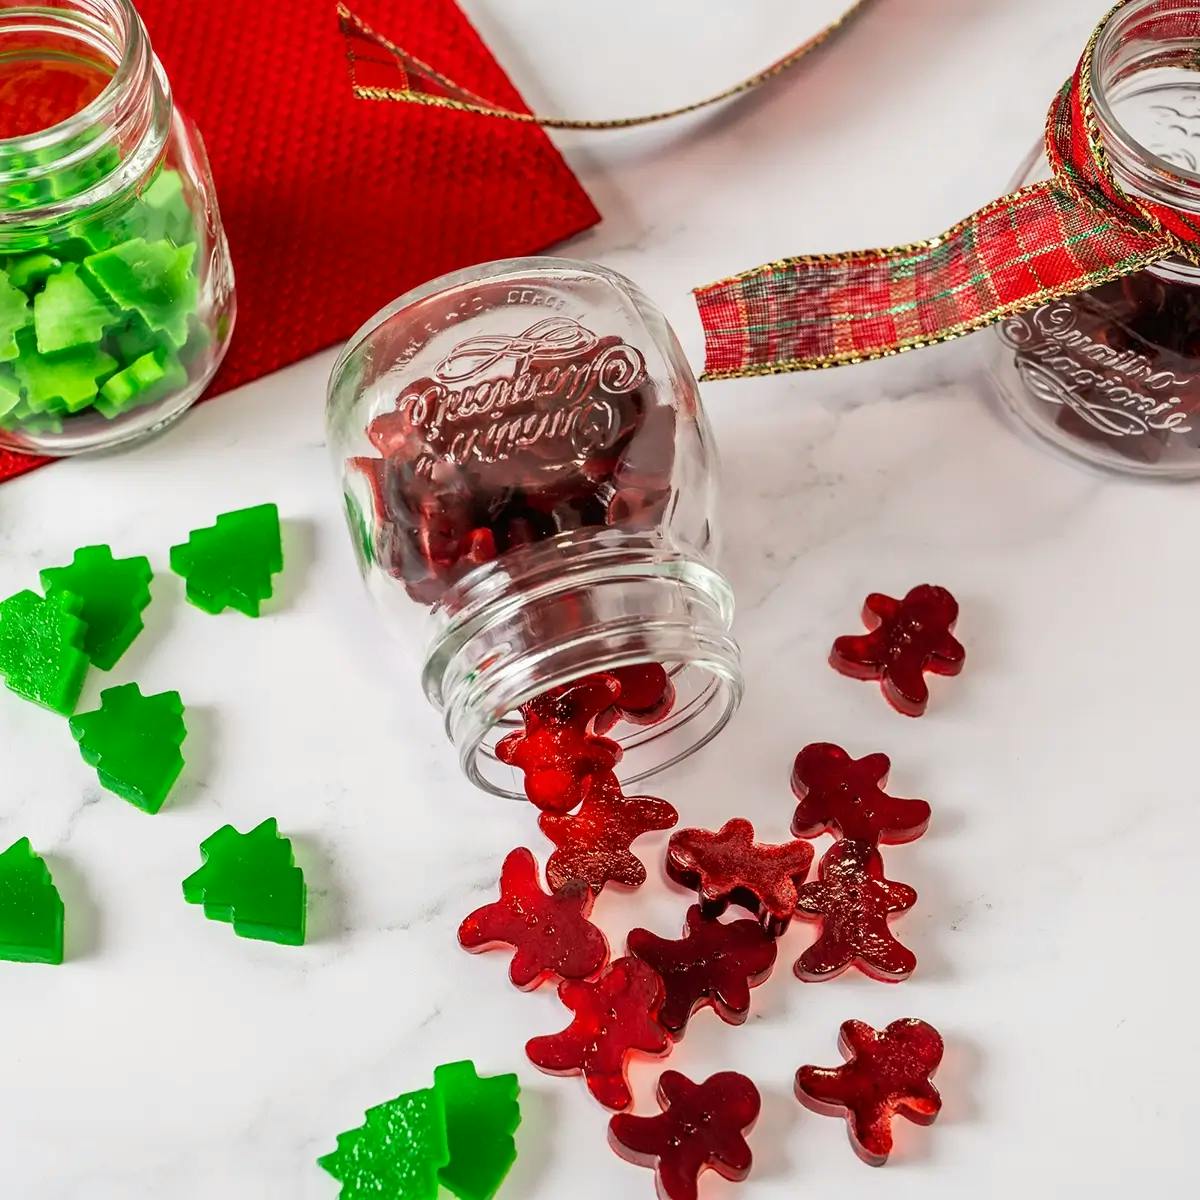 Red and green gummy Christmas candies spilling out of a jar on its side.